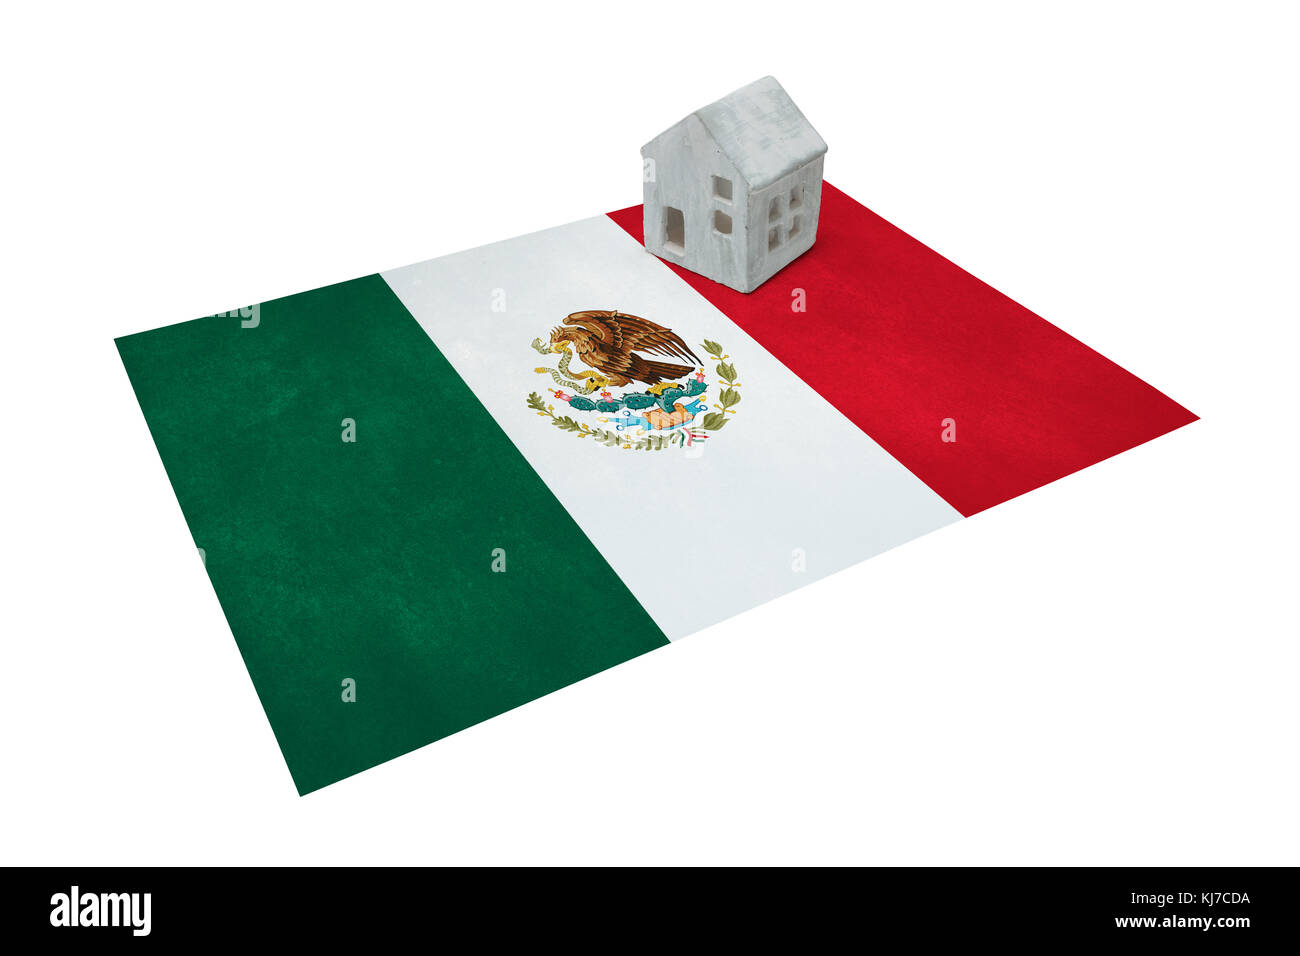 Small house on a flag - Living or migrating to Mexico Stock Photo